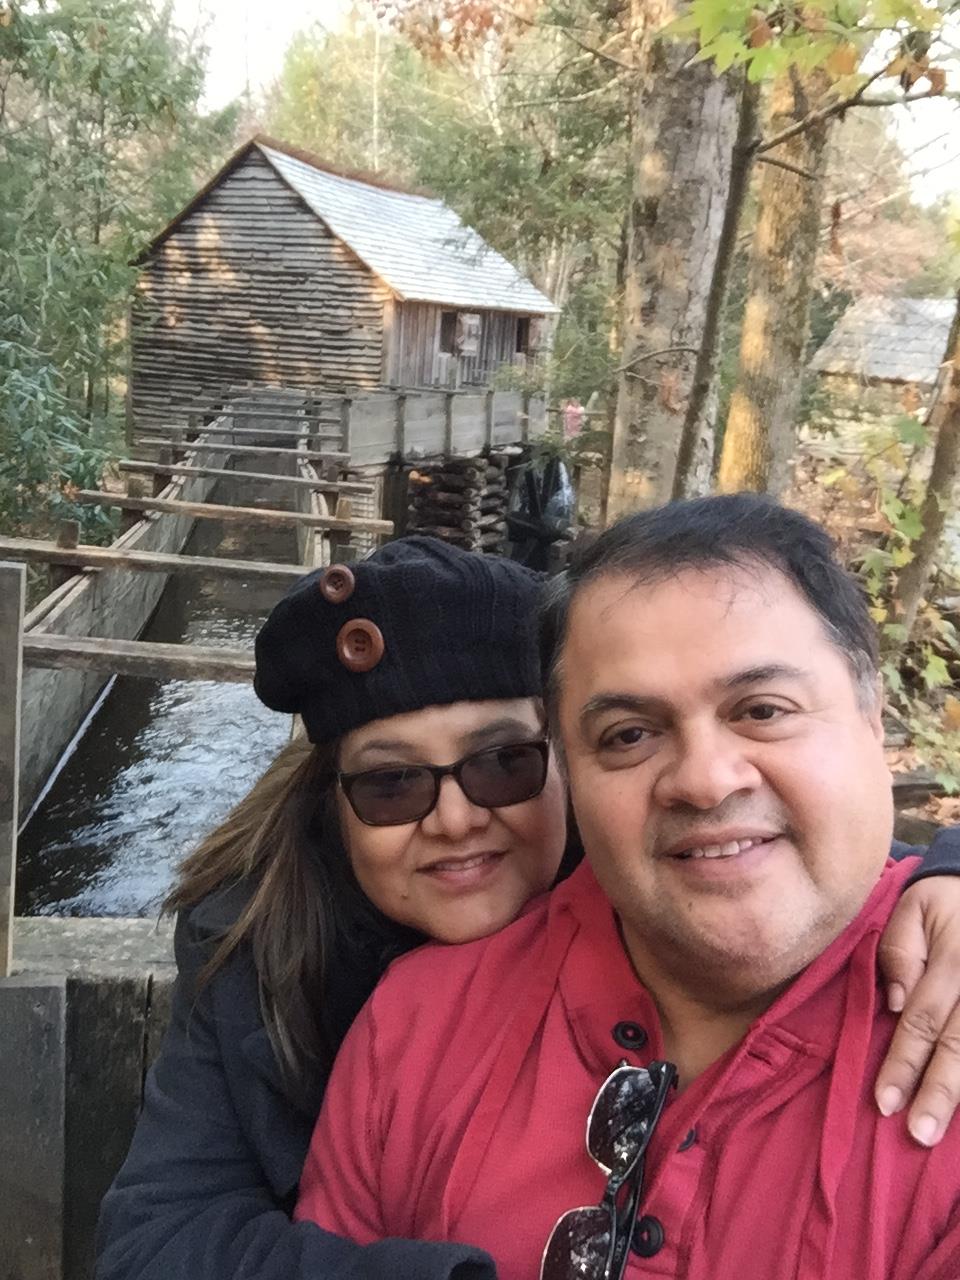 José Cedillo with his wife, Ninfa, at Great Smoky Mountains National Park in Tennessee.